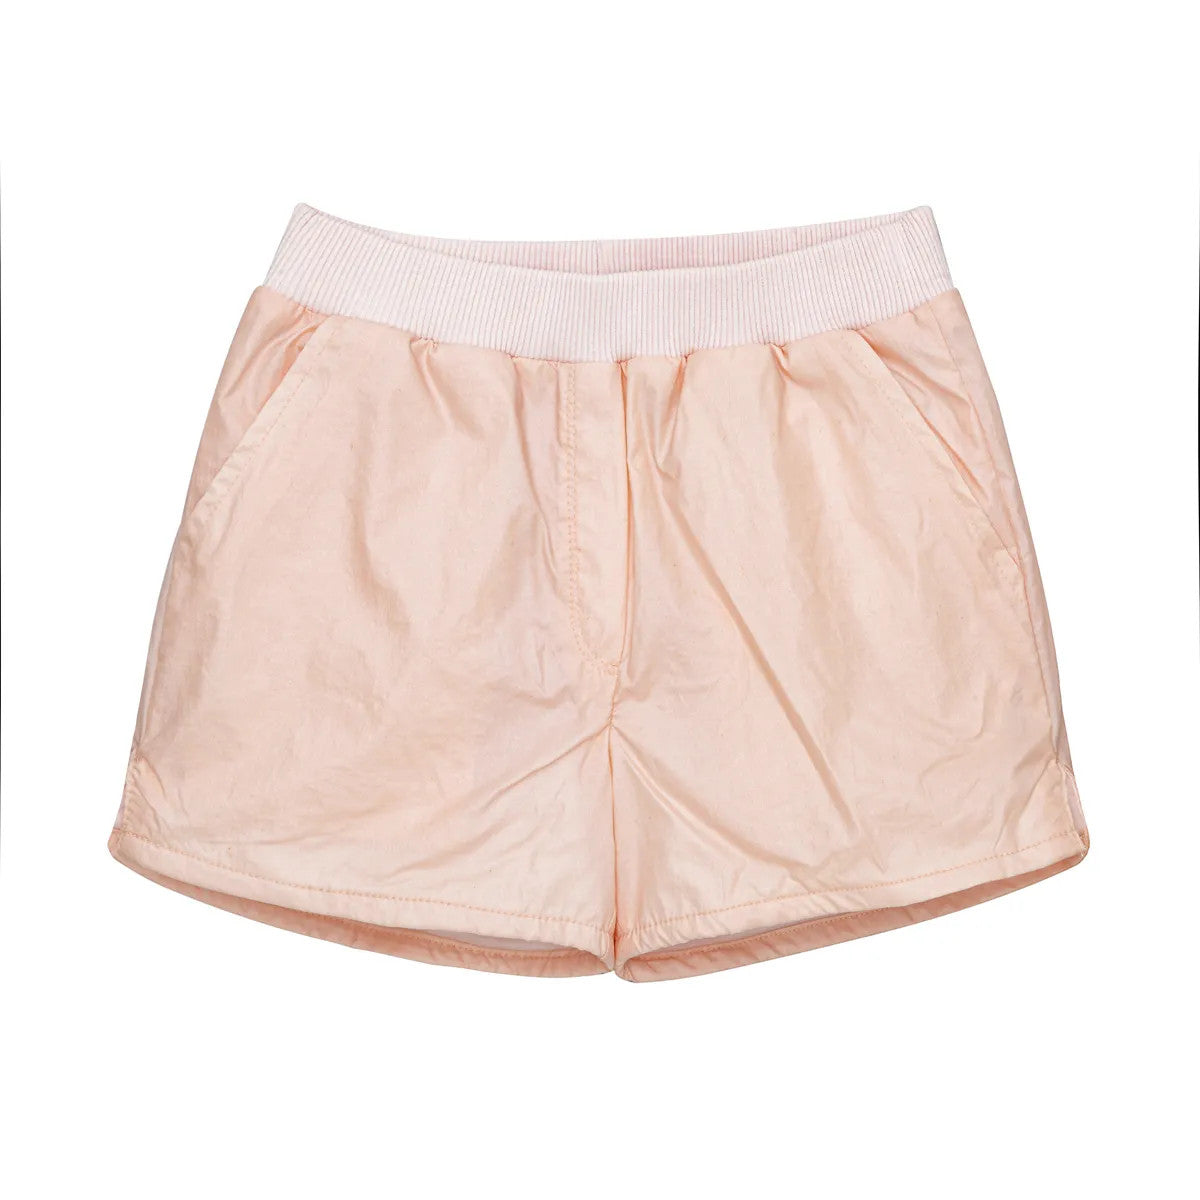 Little Hedonist organic cotton shorts with side pockets and splits for boys and girls in EVening Sand